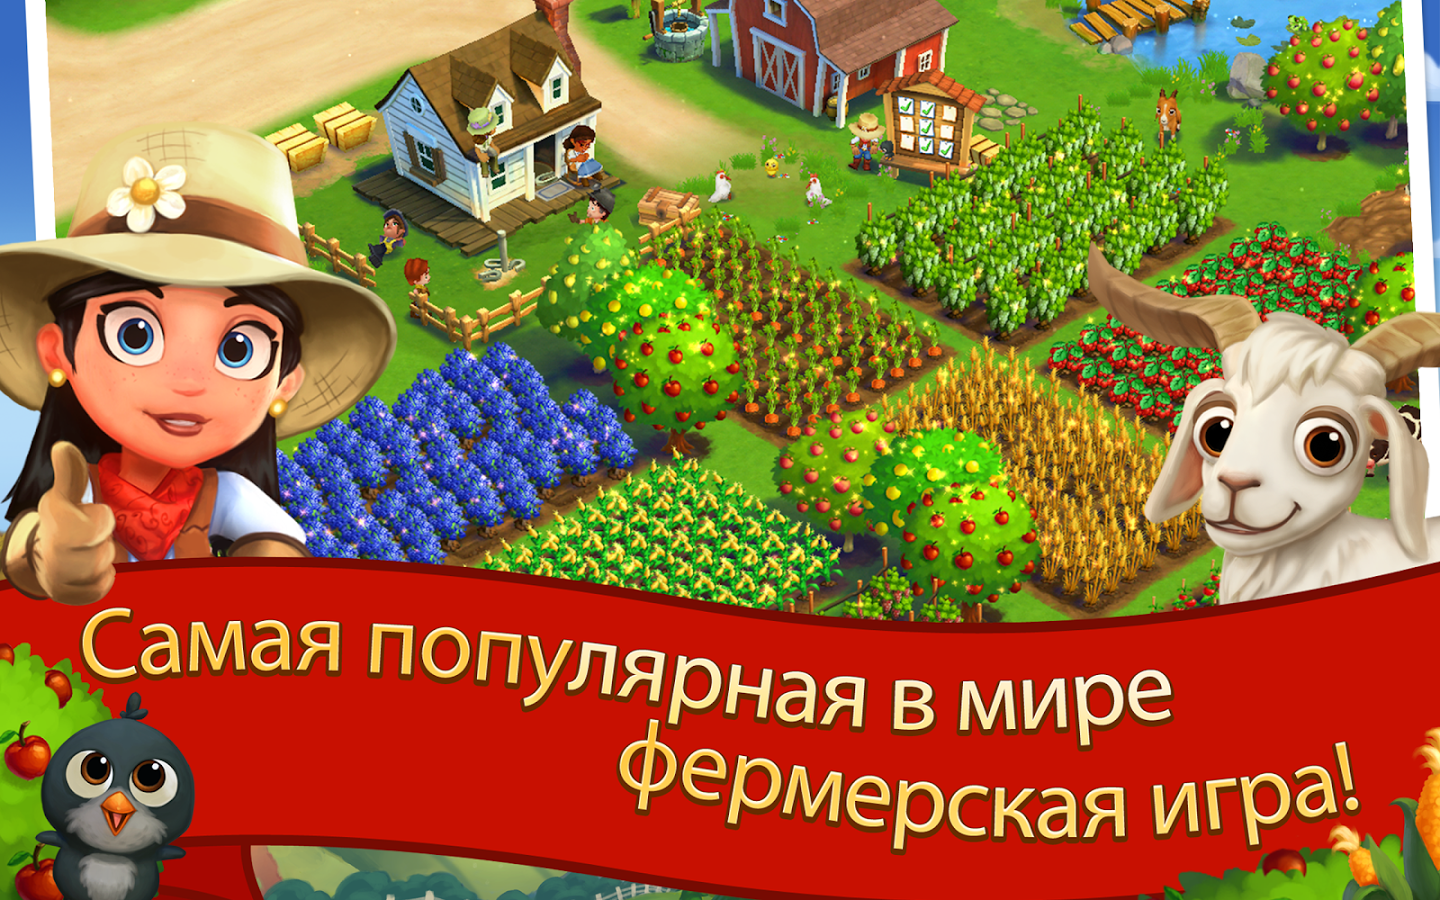 farmville 2 country escape issues